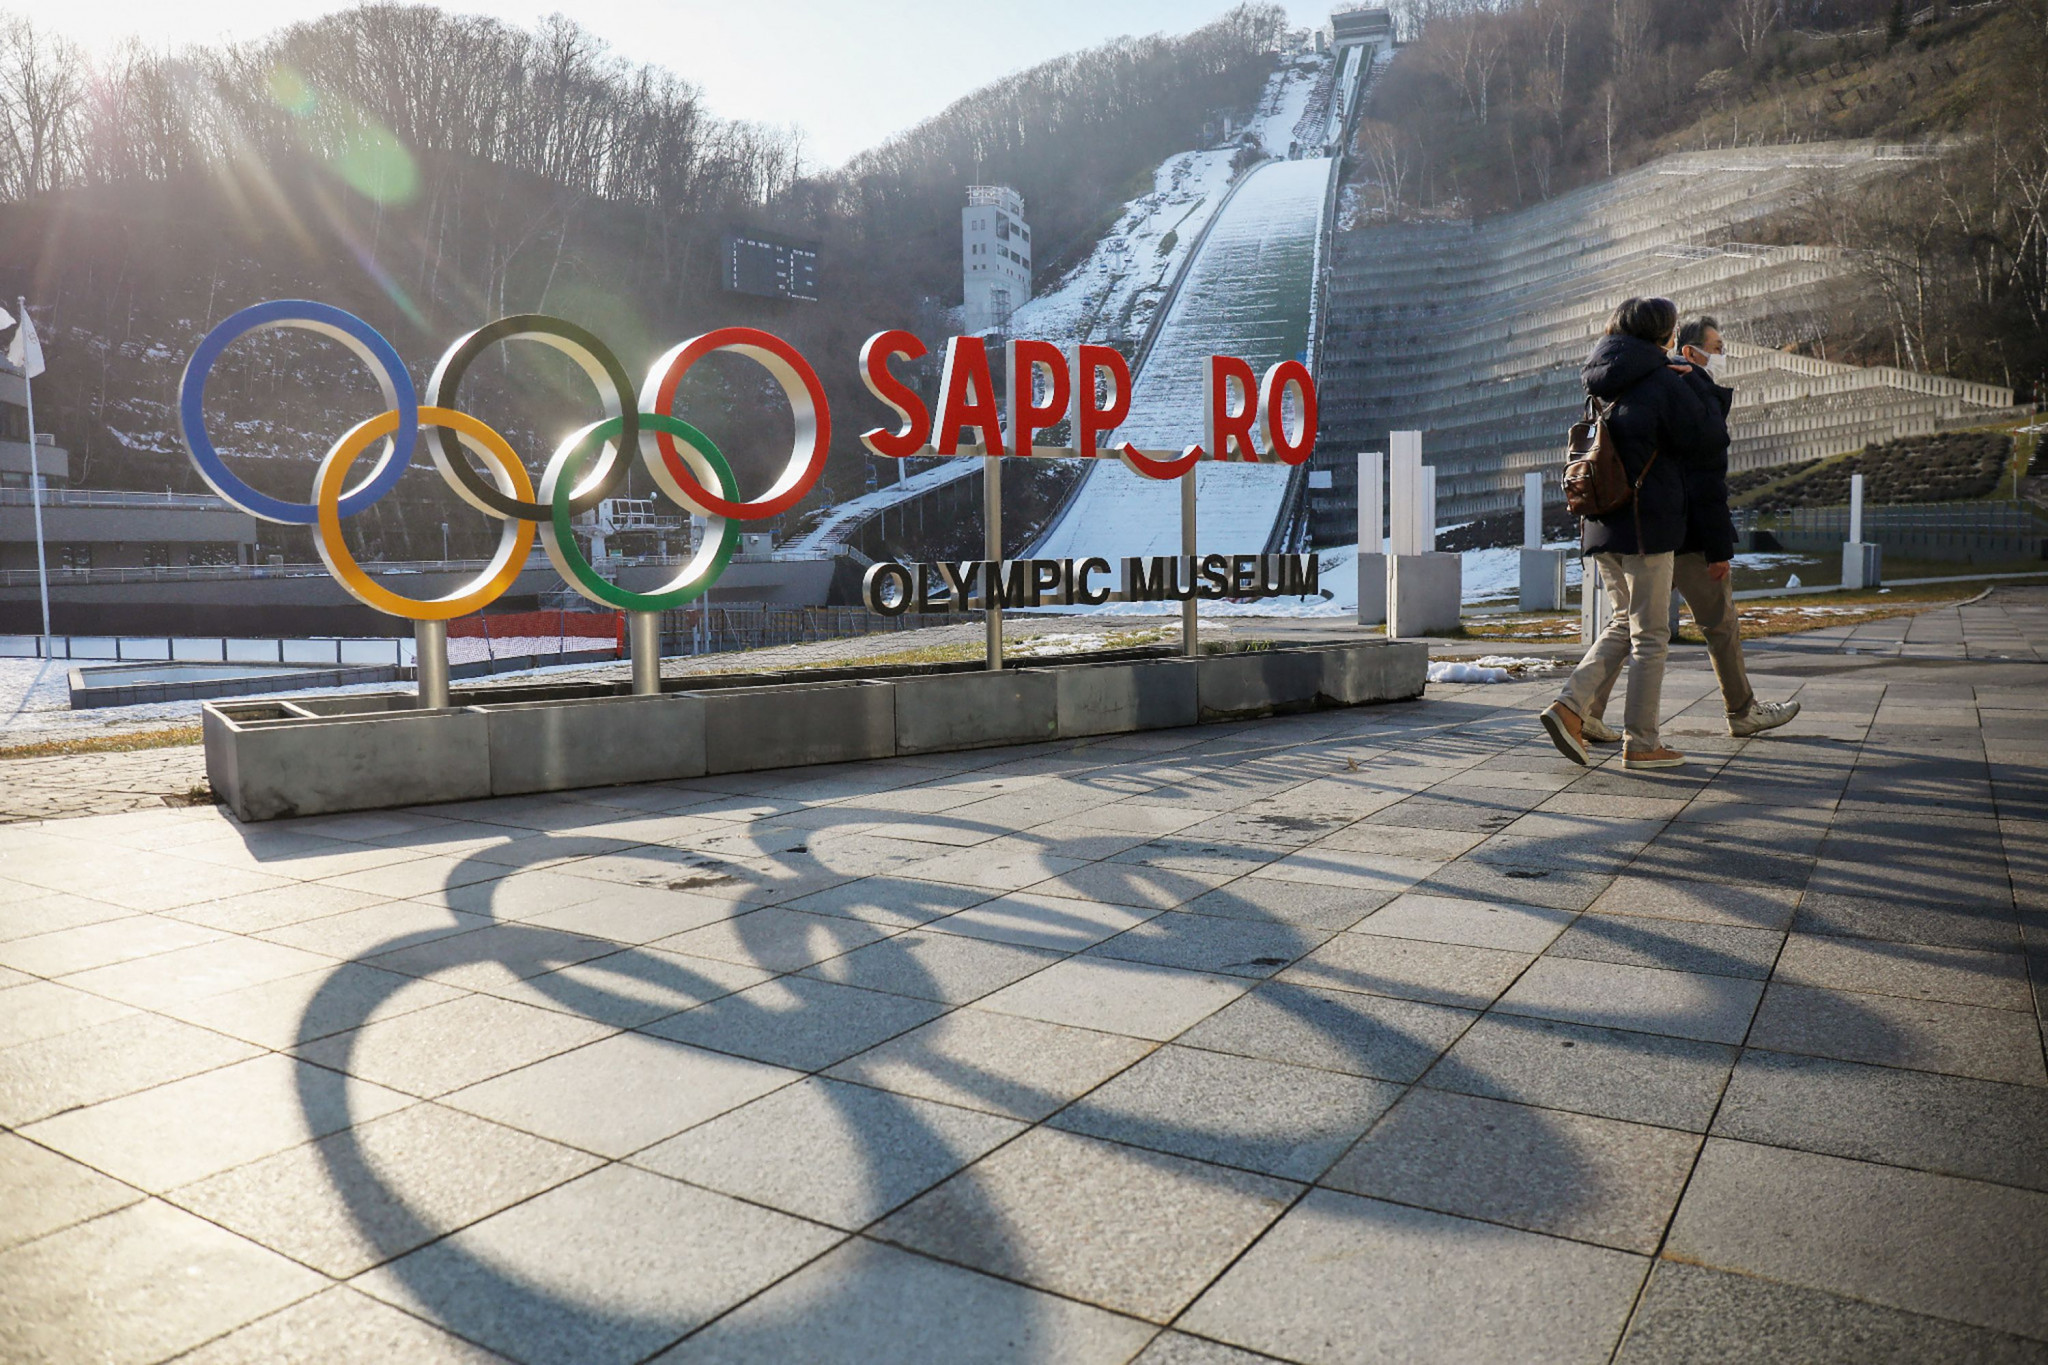 IOC delegation visits Sapporo to inspect potential 2030 Winter Olympics venues